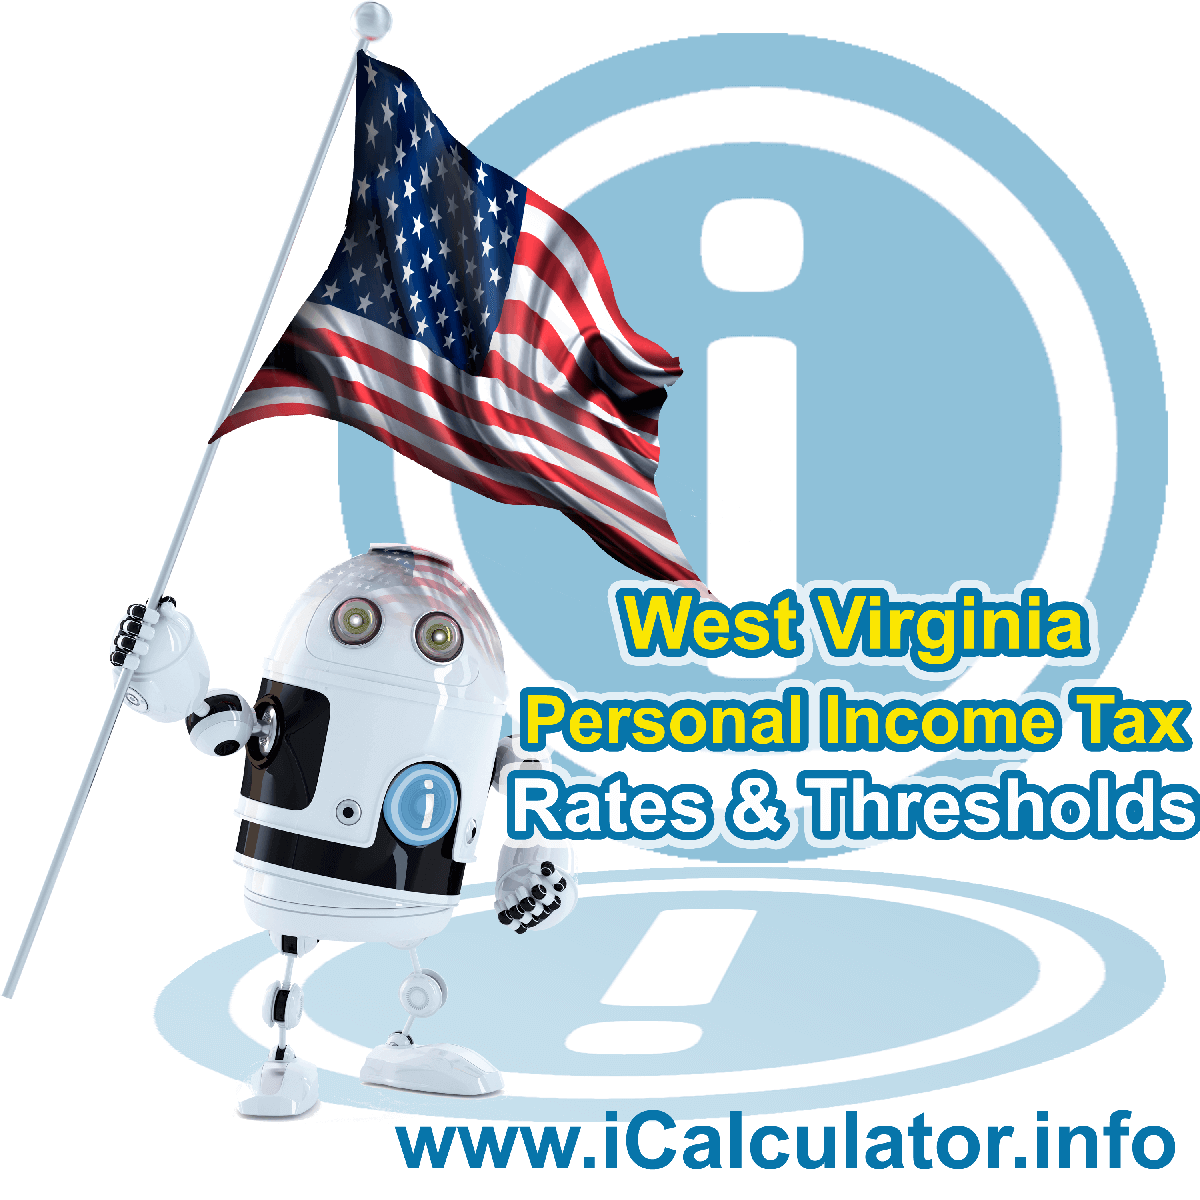 West Virginia State Tax Tables 2017. This image displays details of the West Virginia State Tax Tables for the 2017 tax return year which is provided in support of the 2017 US Tax Calculator